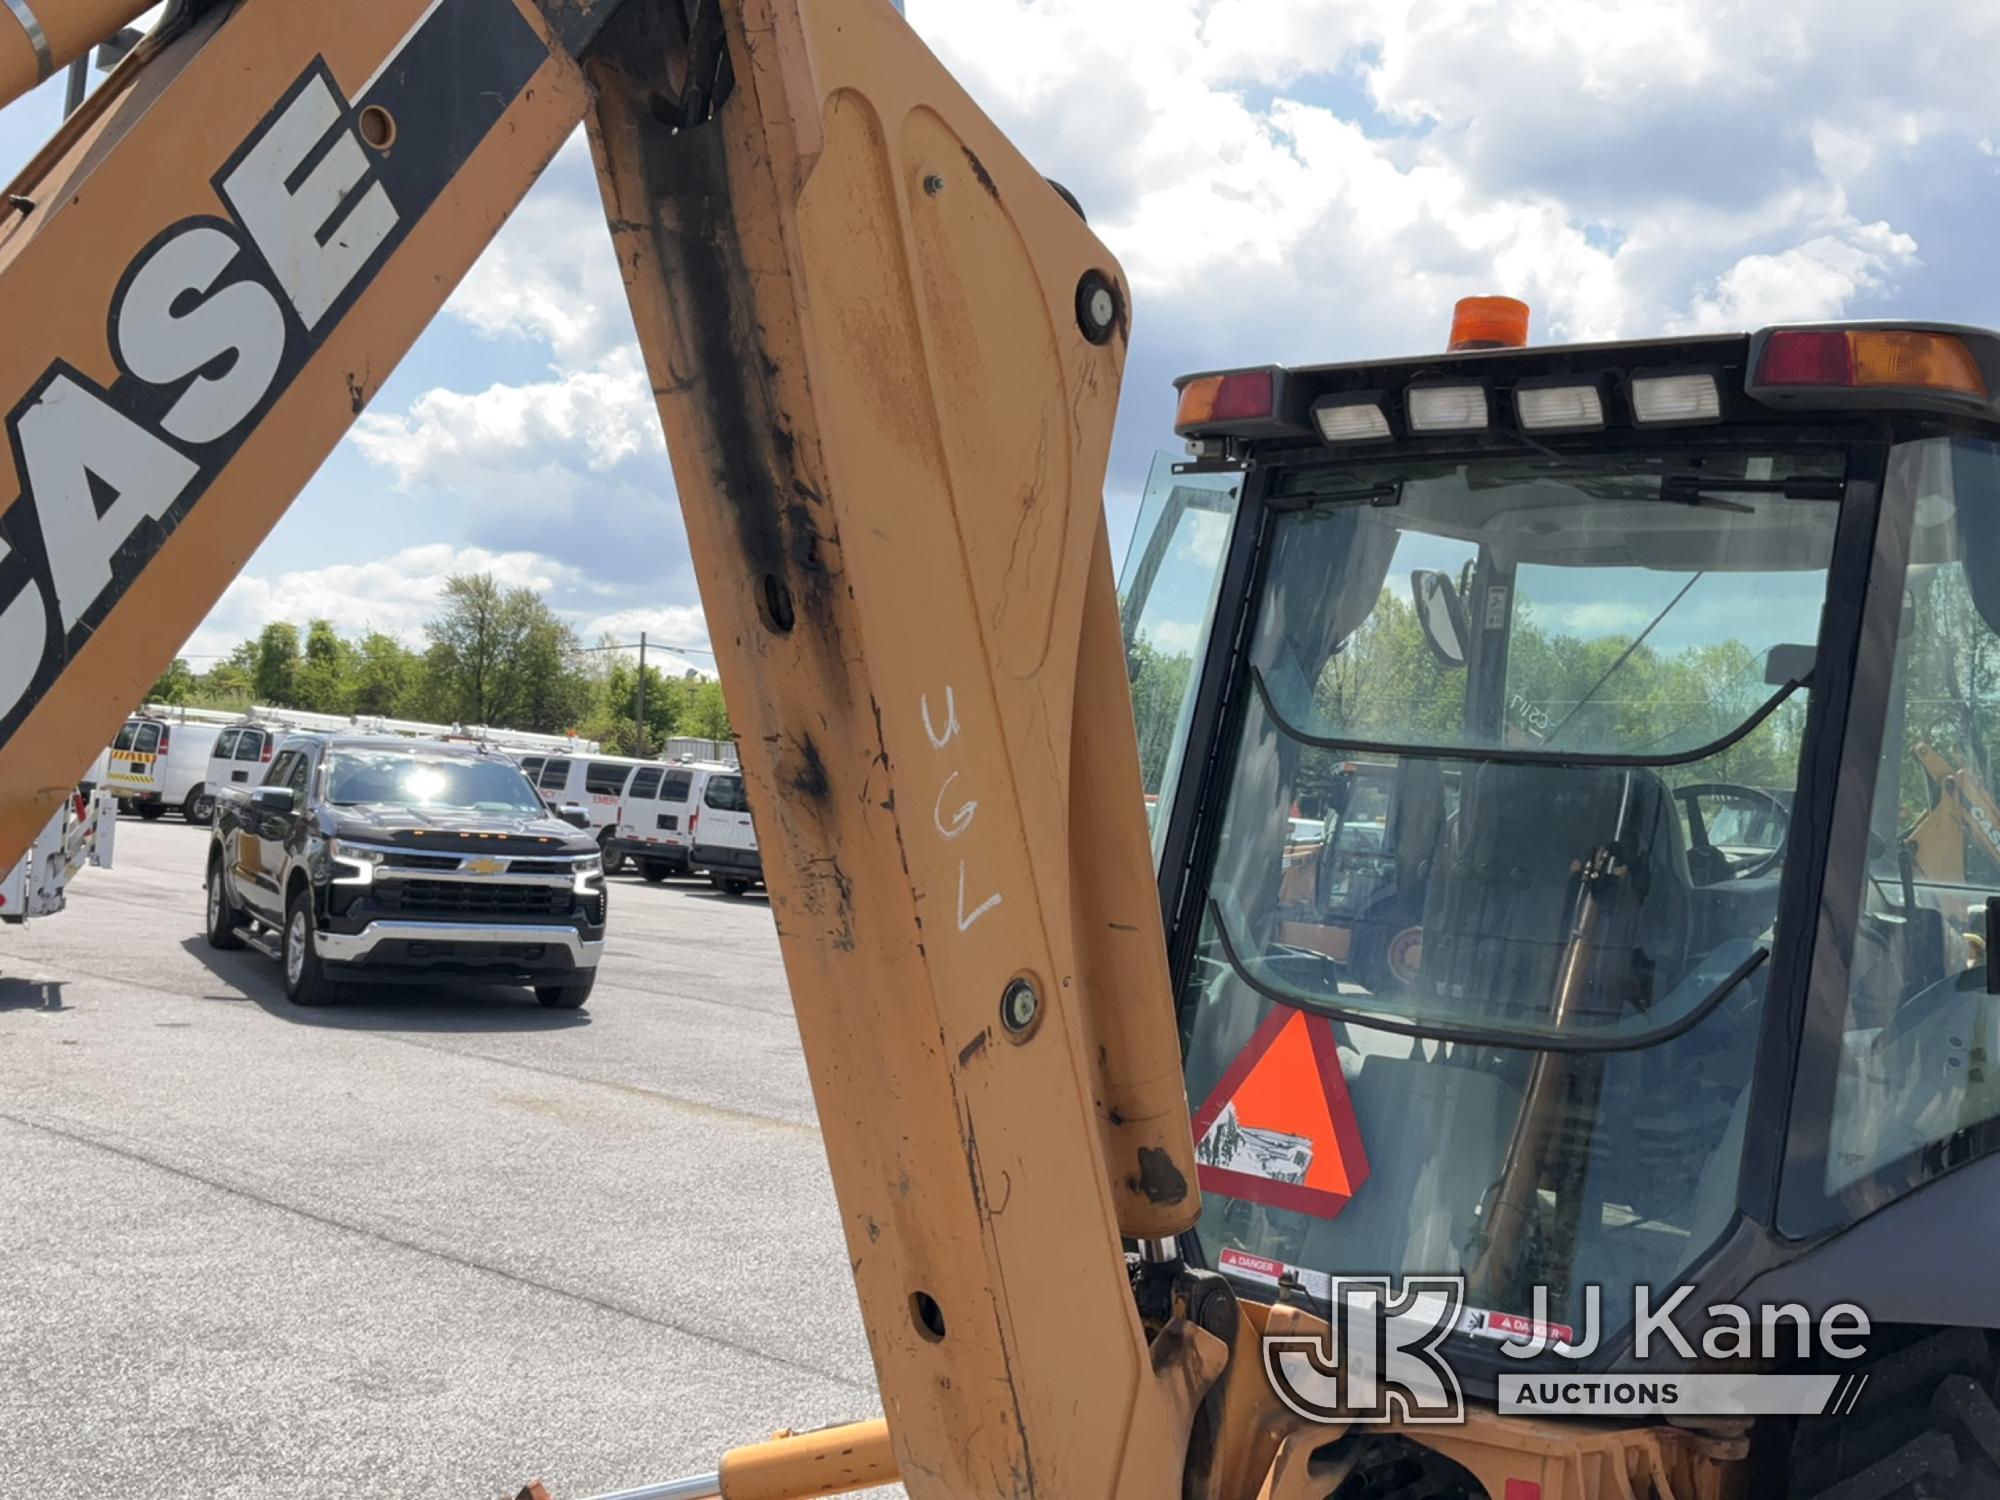 (Chester Springs, PA) 2005 Case 580 M Series 2 4x4 Tractor Loader Backhoe No Title) (Runs & Moves) (